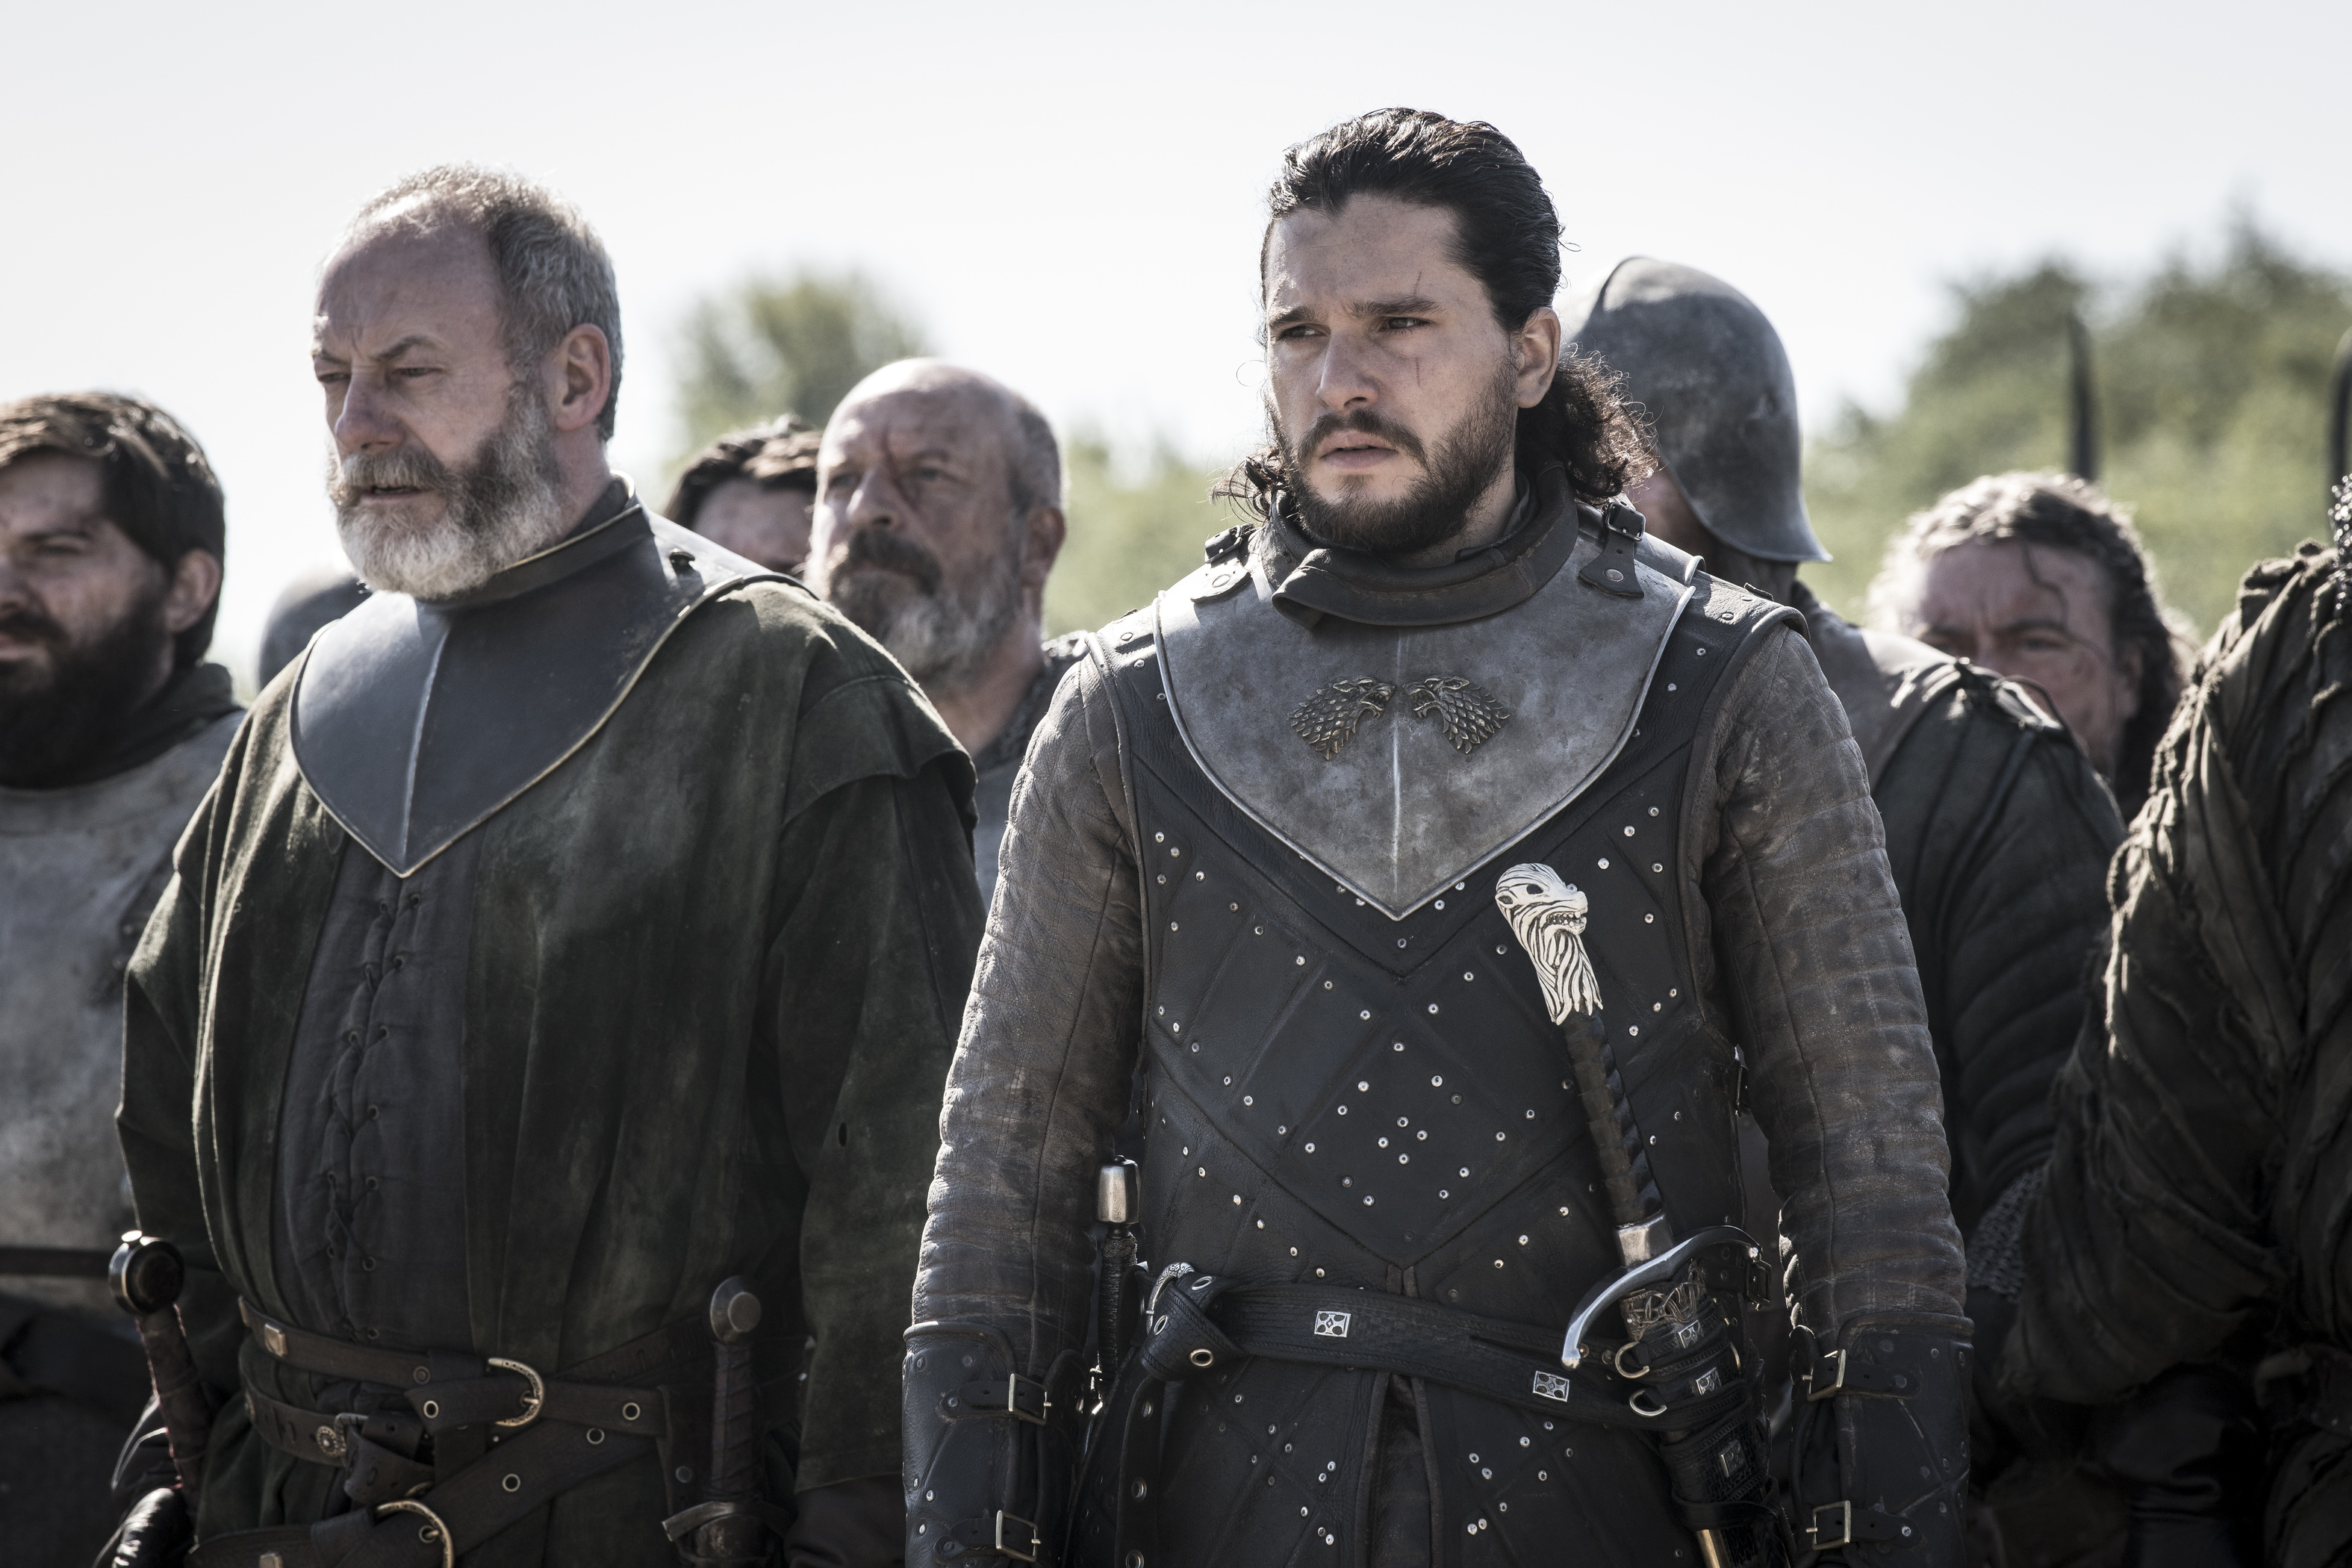 Game of Thrones series finale airs on Sunday 18 May.